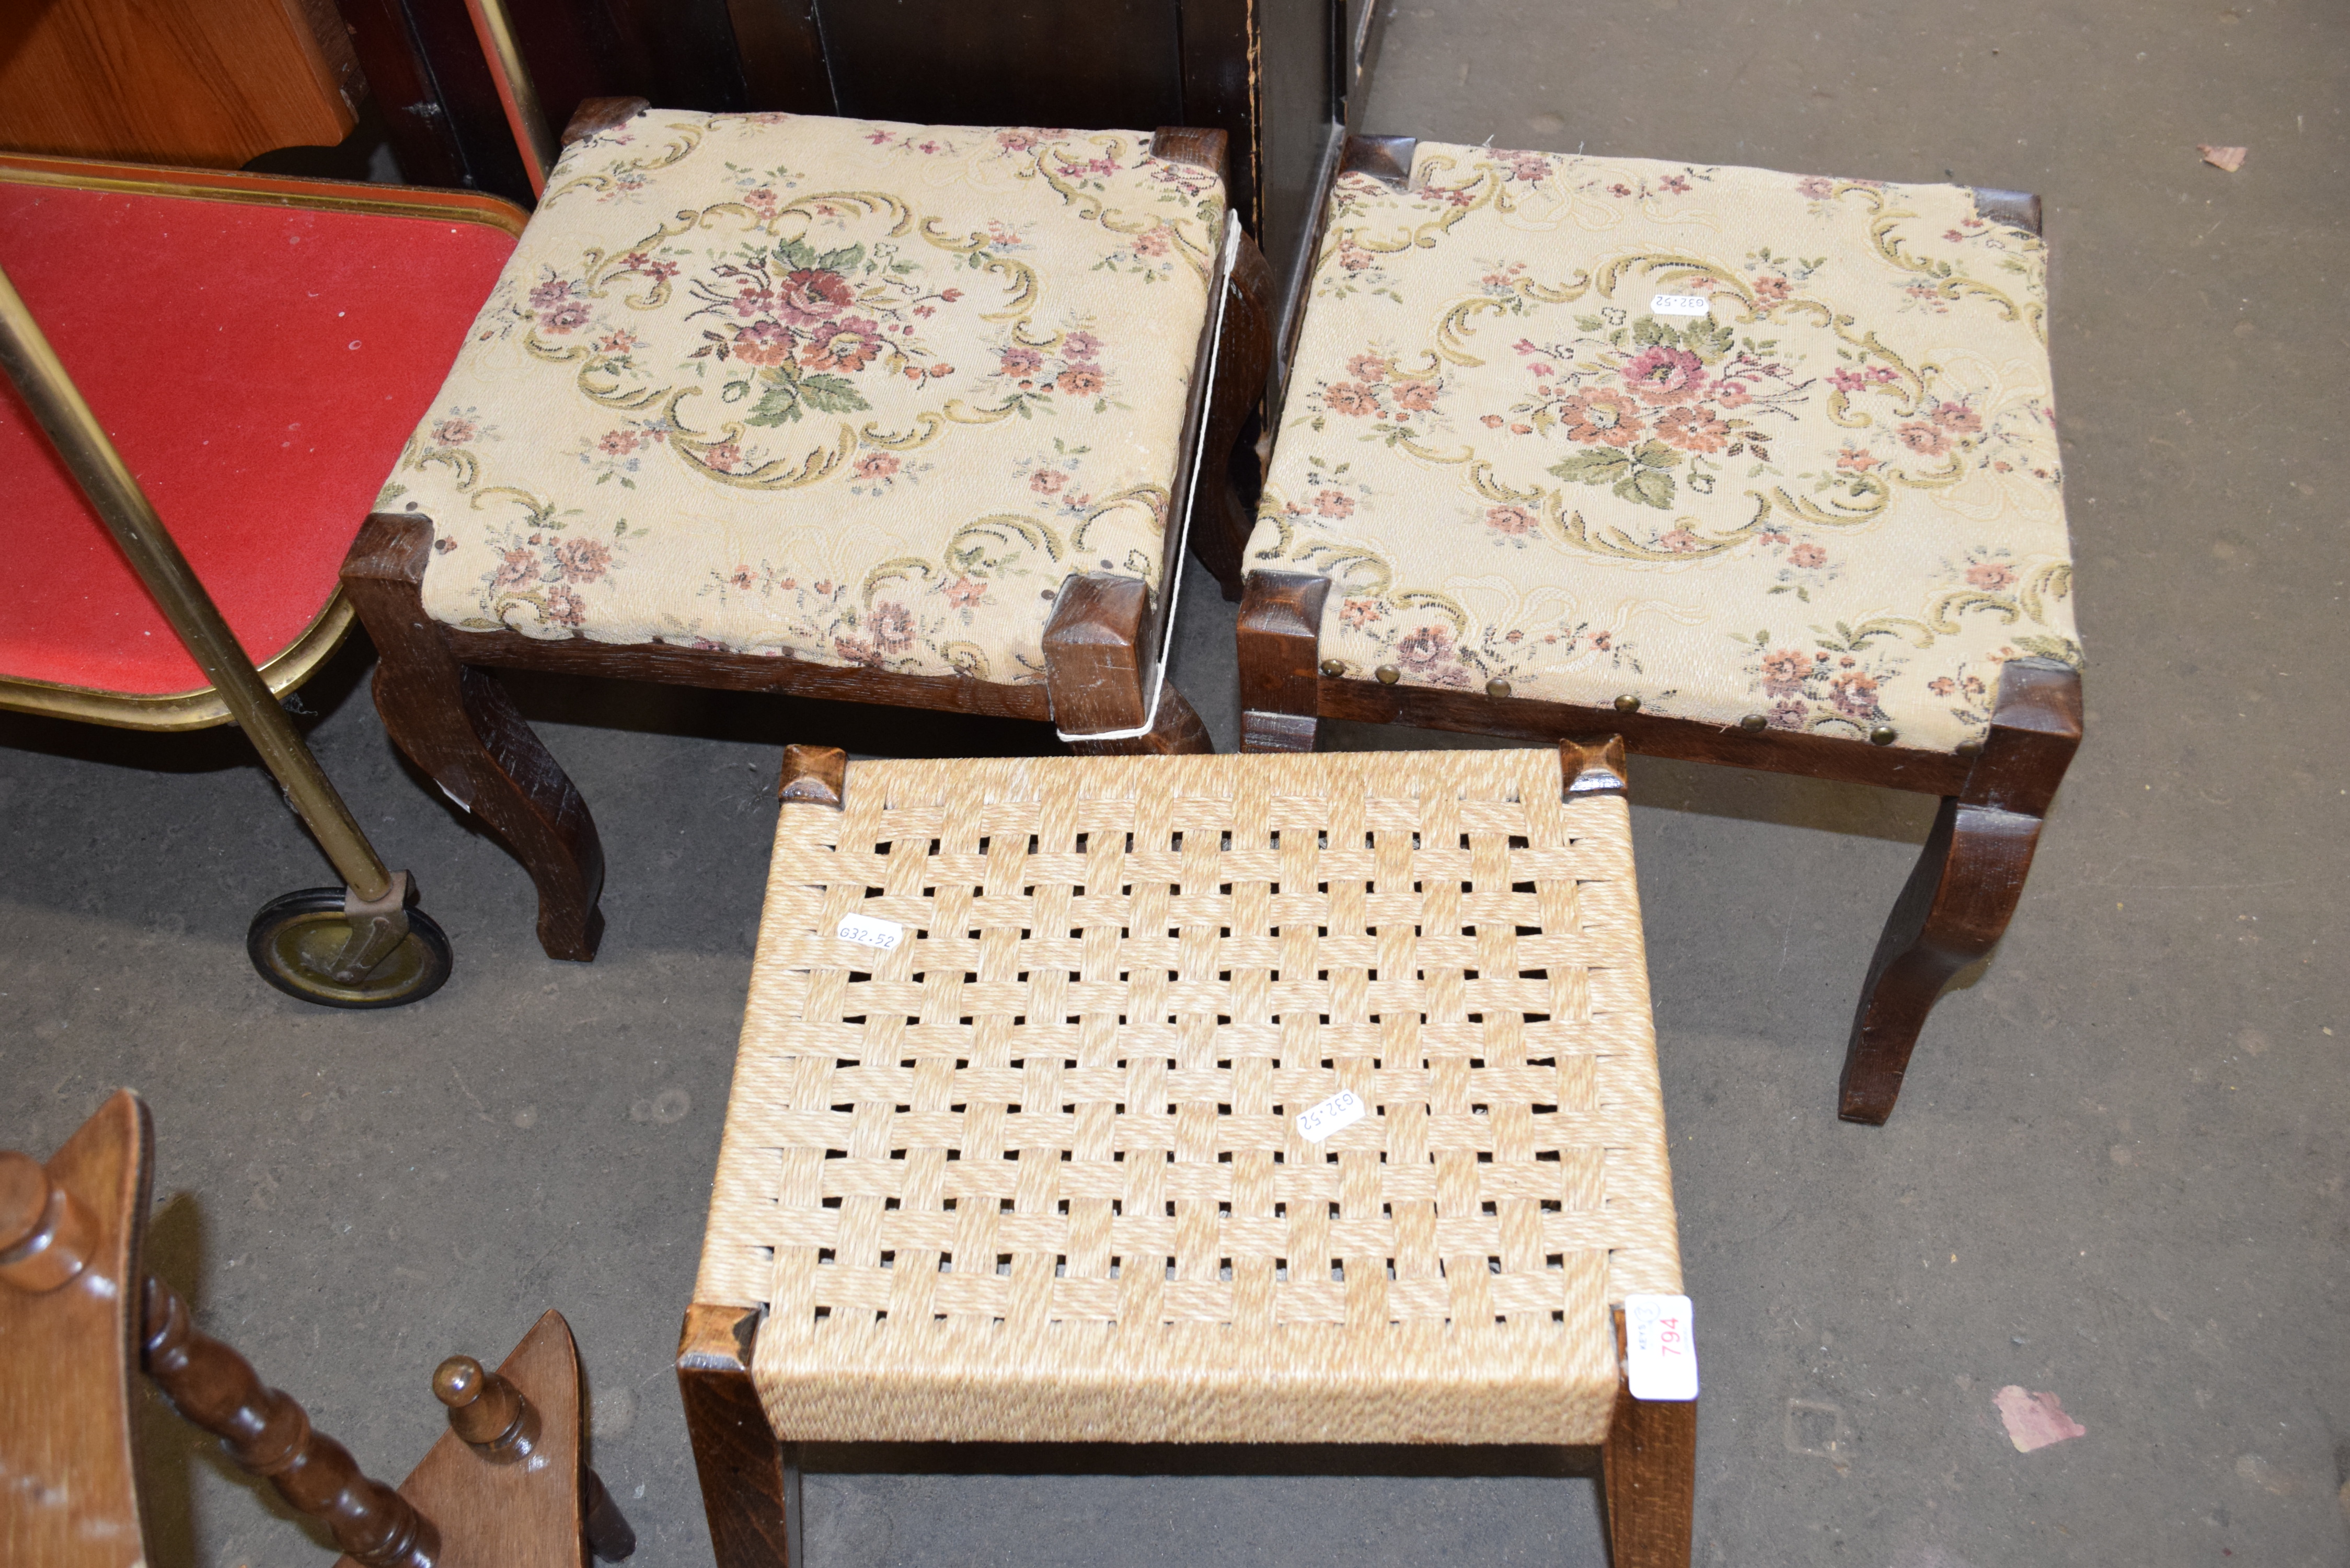 THREE VARIOUS ASSORTED OAK FRAMED STOOLS, TWO WITH FLORAL UPHOLSTERY